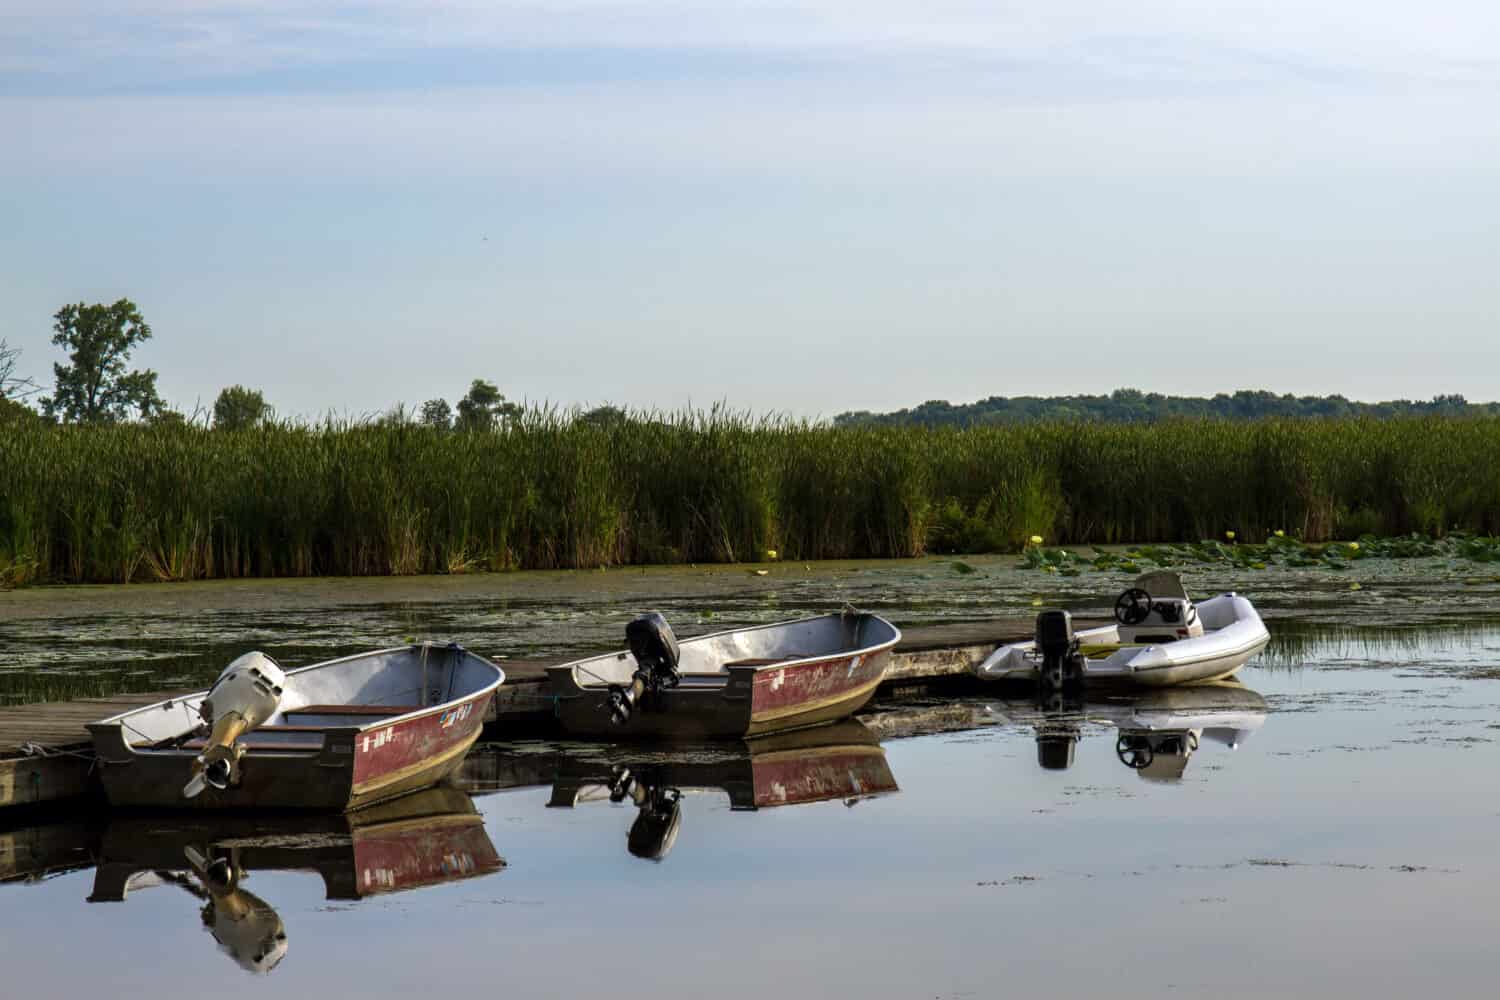 Three motorized fishing boats reflected in the water at dawn in Chain O' Lakes State Park near Antioch, Illinois